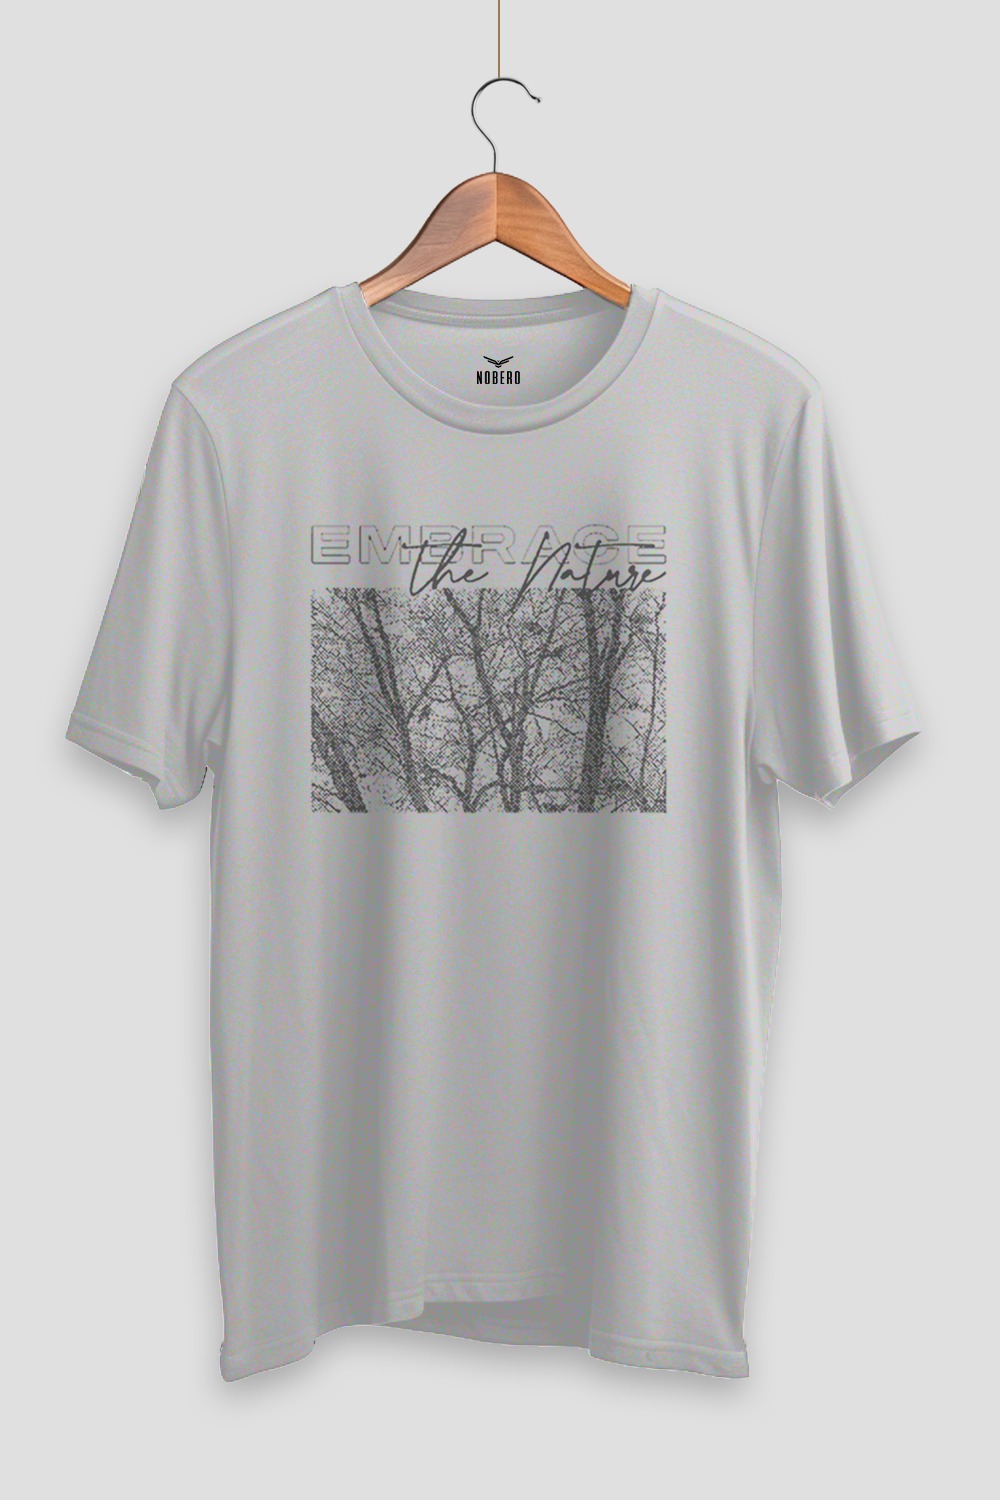 Embrace The Nature Classic Fit T-Shirt